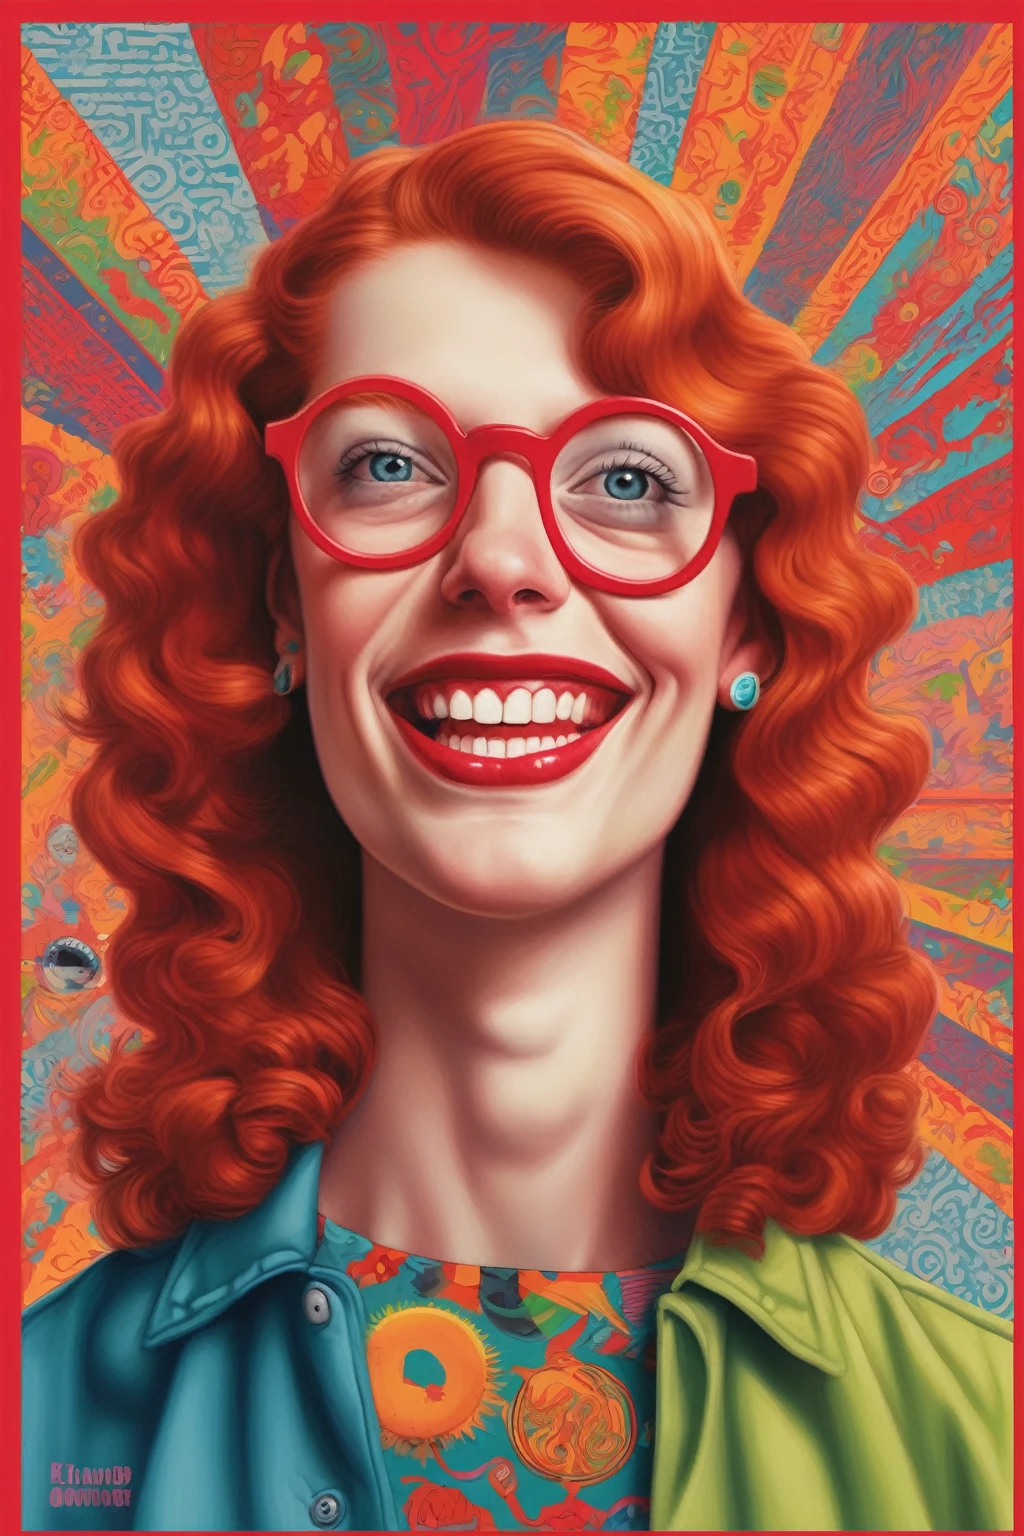 Alex Gross Style - pintura de Alex Gross The image you've uploaded appears to be inspired by the cover art of an album (let's talk about feelings) by LAGWAGON hardcore punk band, featuring a stylized and colorful portrait with a retro graphic design background. The character is a girl depicted with a vibrant, friendly smile, curly red hair, and glasses, set against a bright and bold patterned background that includes text. It carries a strong 90s punk rock aesthetic, reminiscent of album cover art from bands of that era, combining a quirky and expressive portrait with eye-catching typography.